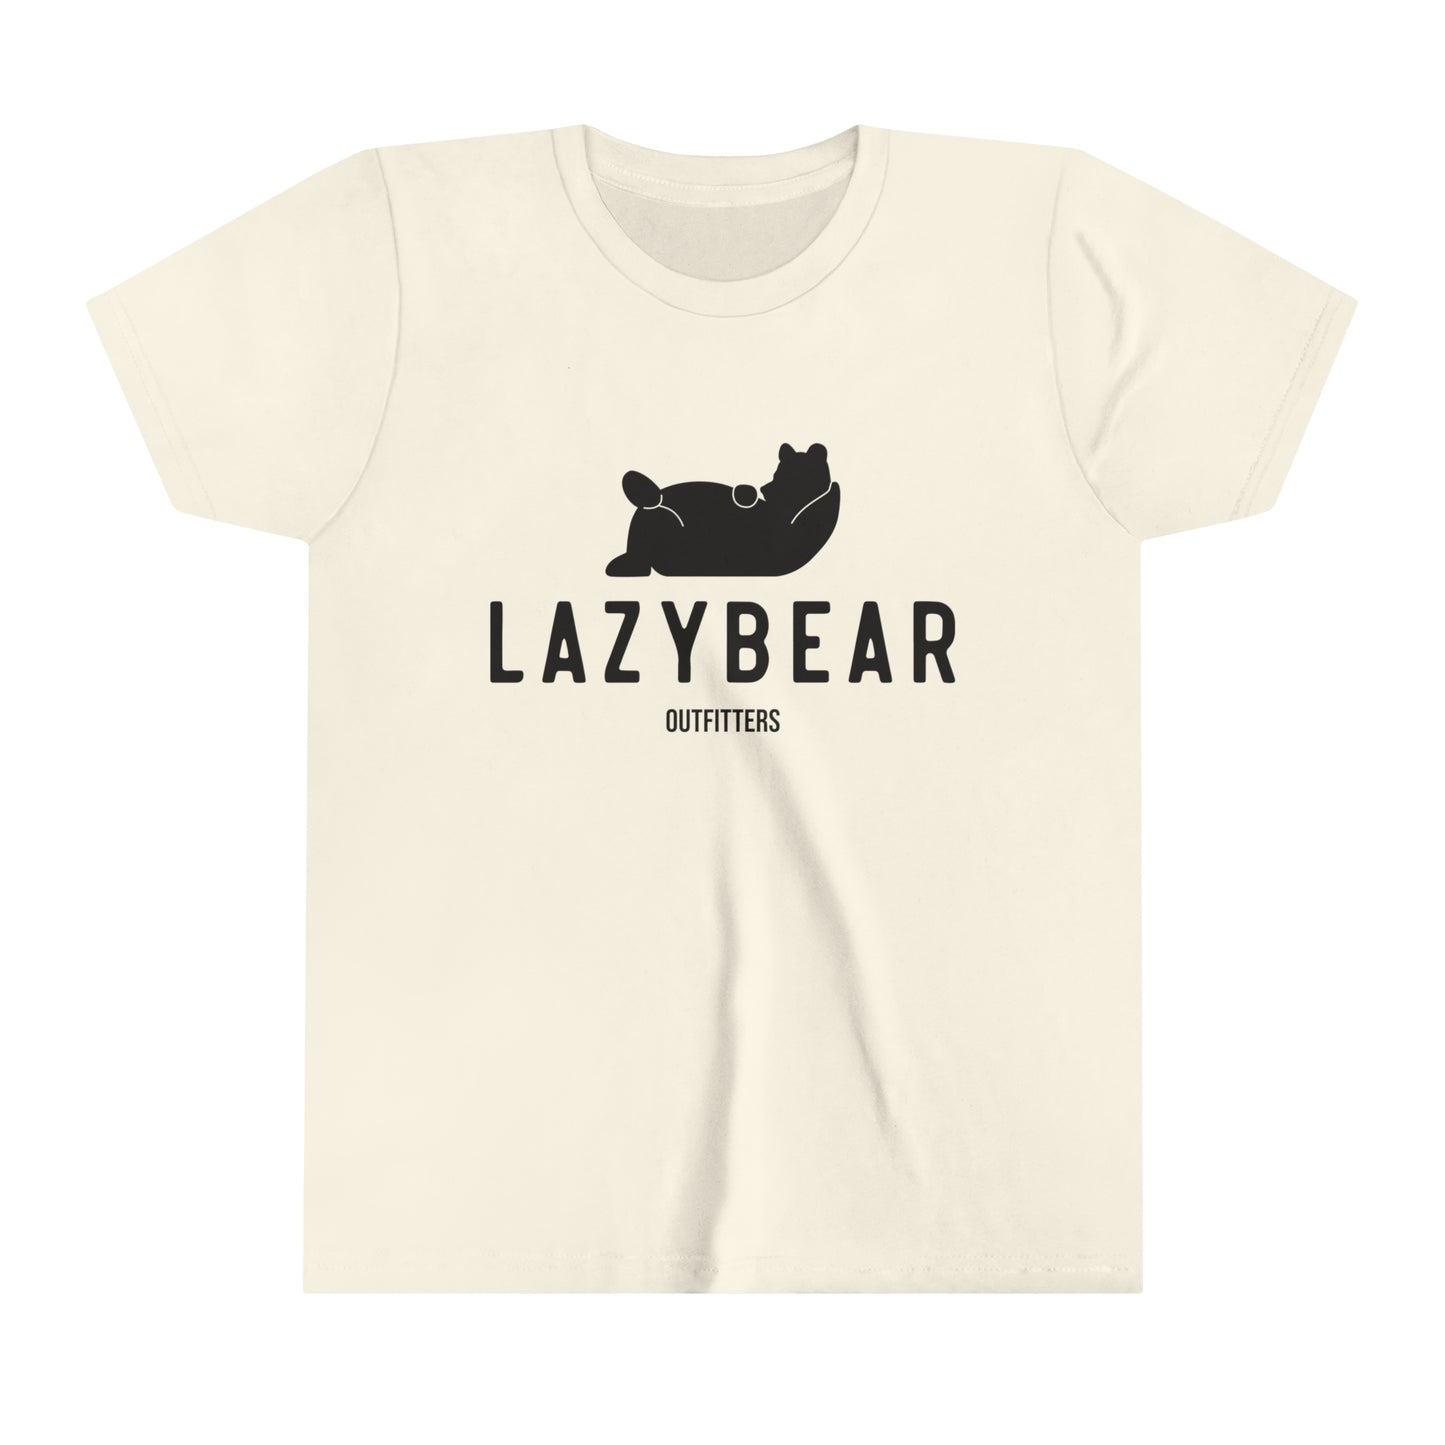 Lazy Bear Outfitters' Kids Tee